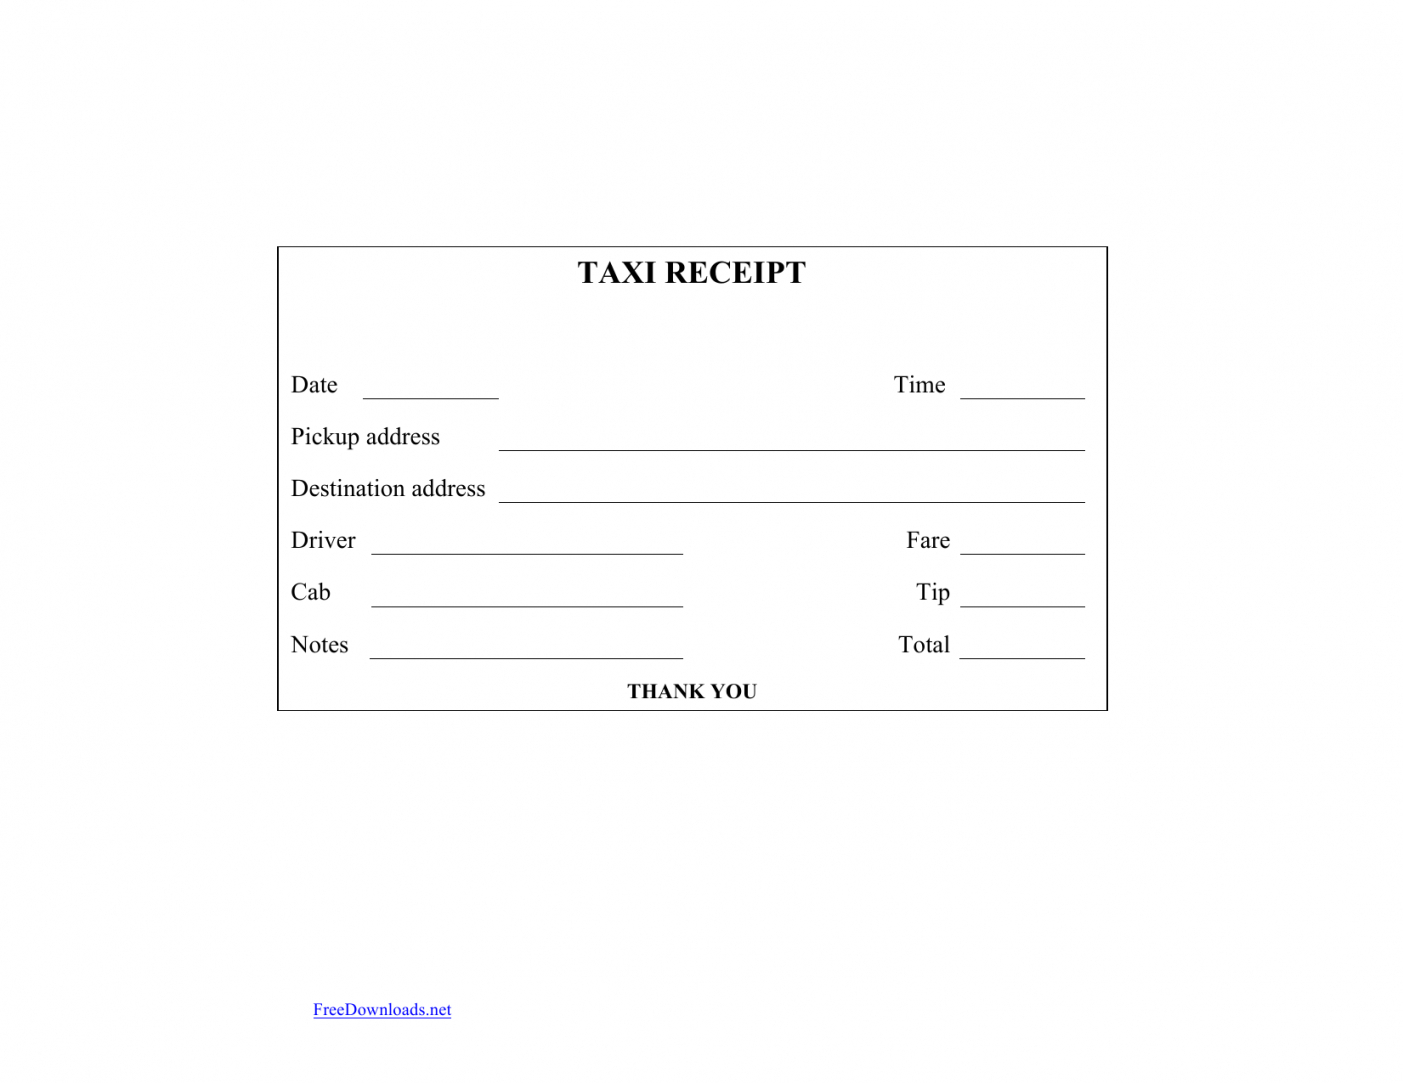 Download Blank Printable Taxicab Receipt Template  Excel  Pdf intended for Blank Taxi Receipt Template